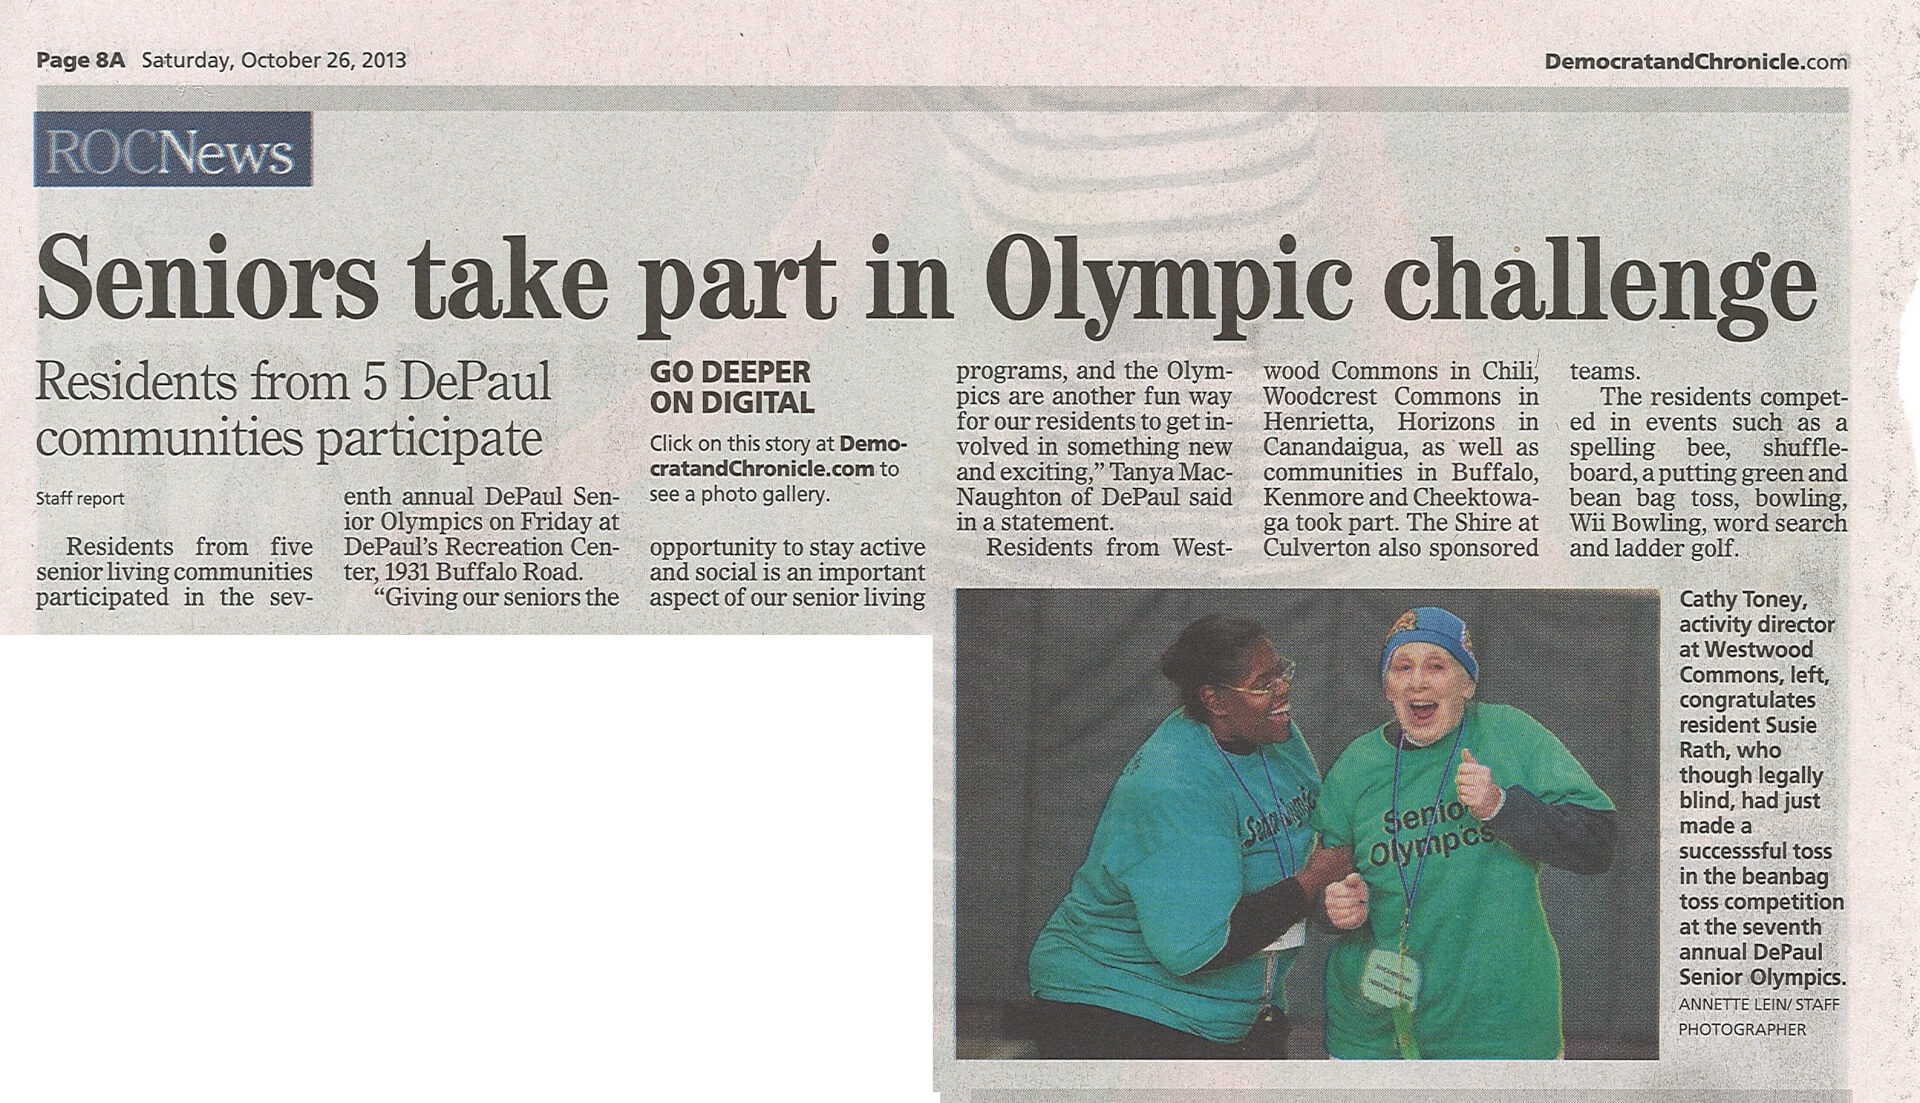 DePaul Senior Living Residents participate in olympic games story in the Democrat and Chronicle October 2013